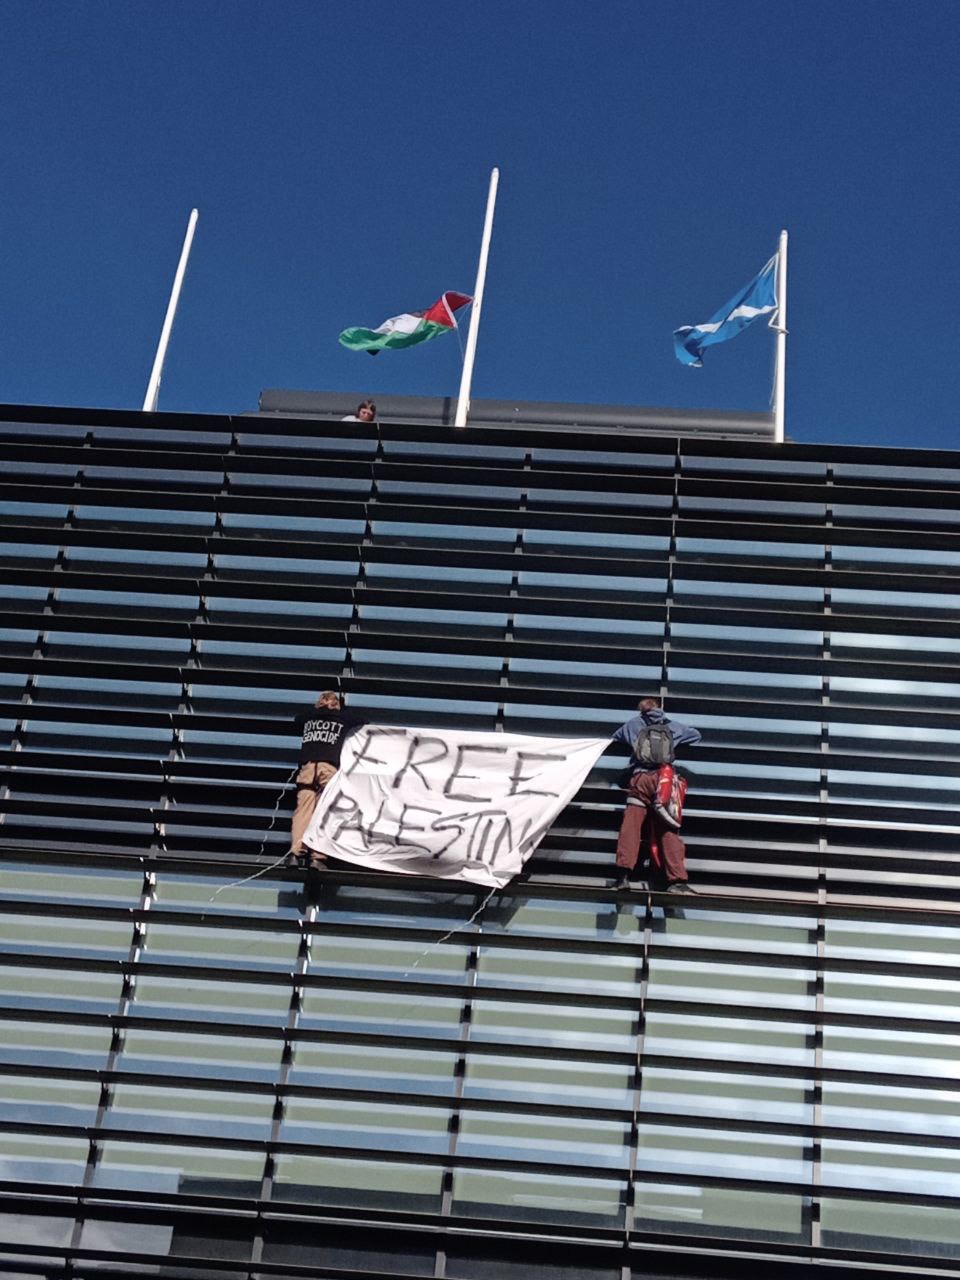 Activists unfurled a Palestinian flag on the roof of the UK Government building (This Is Rigged/PA).